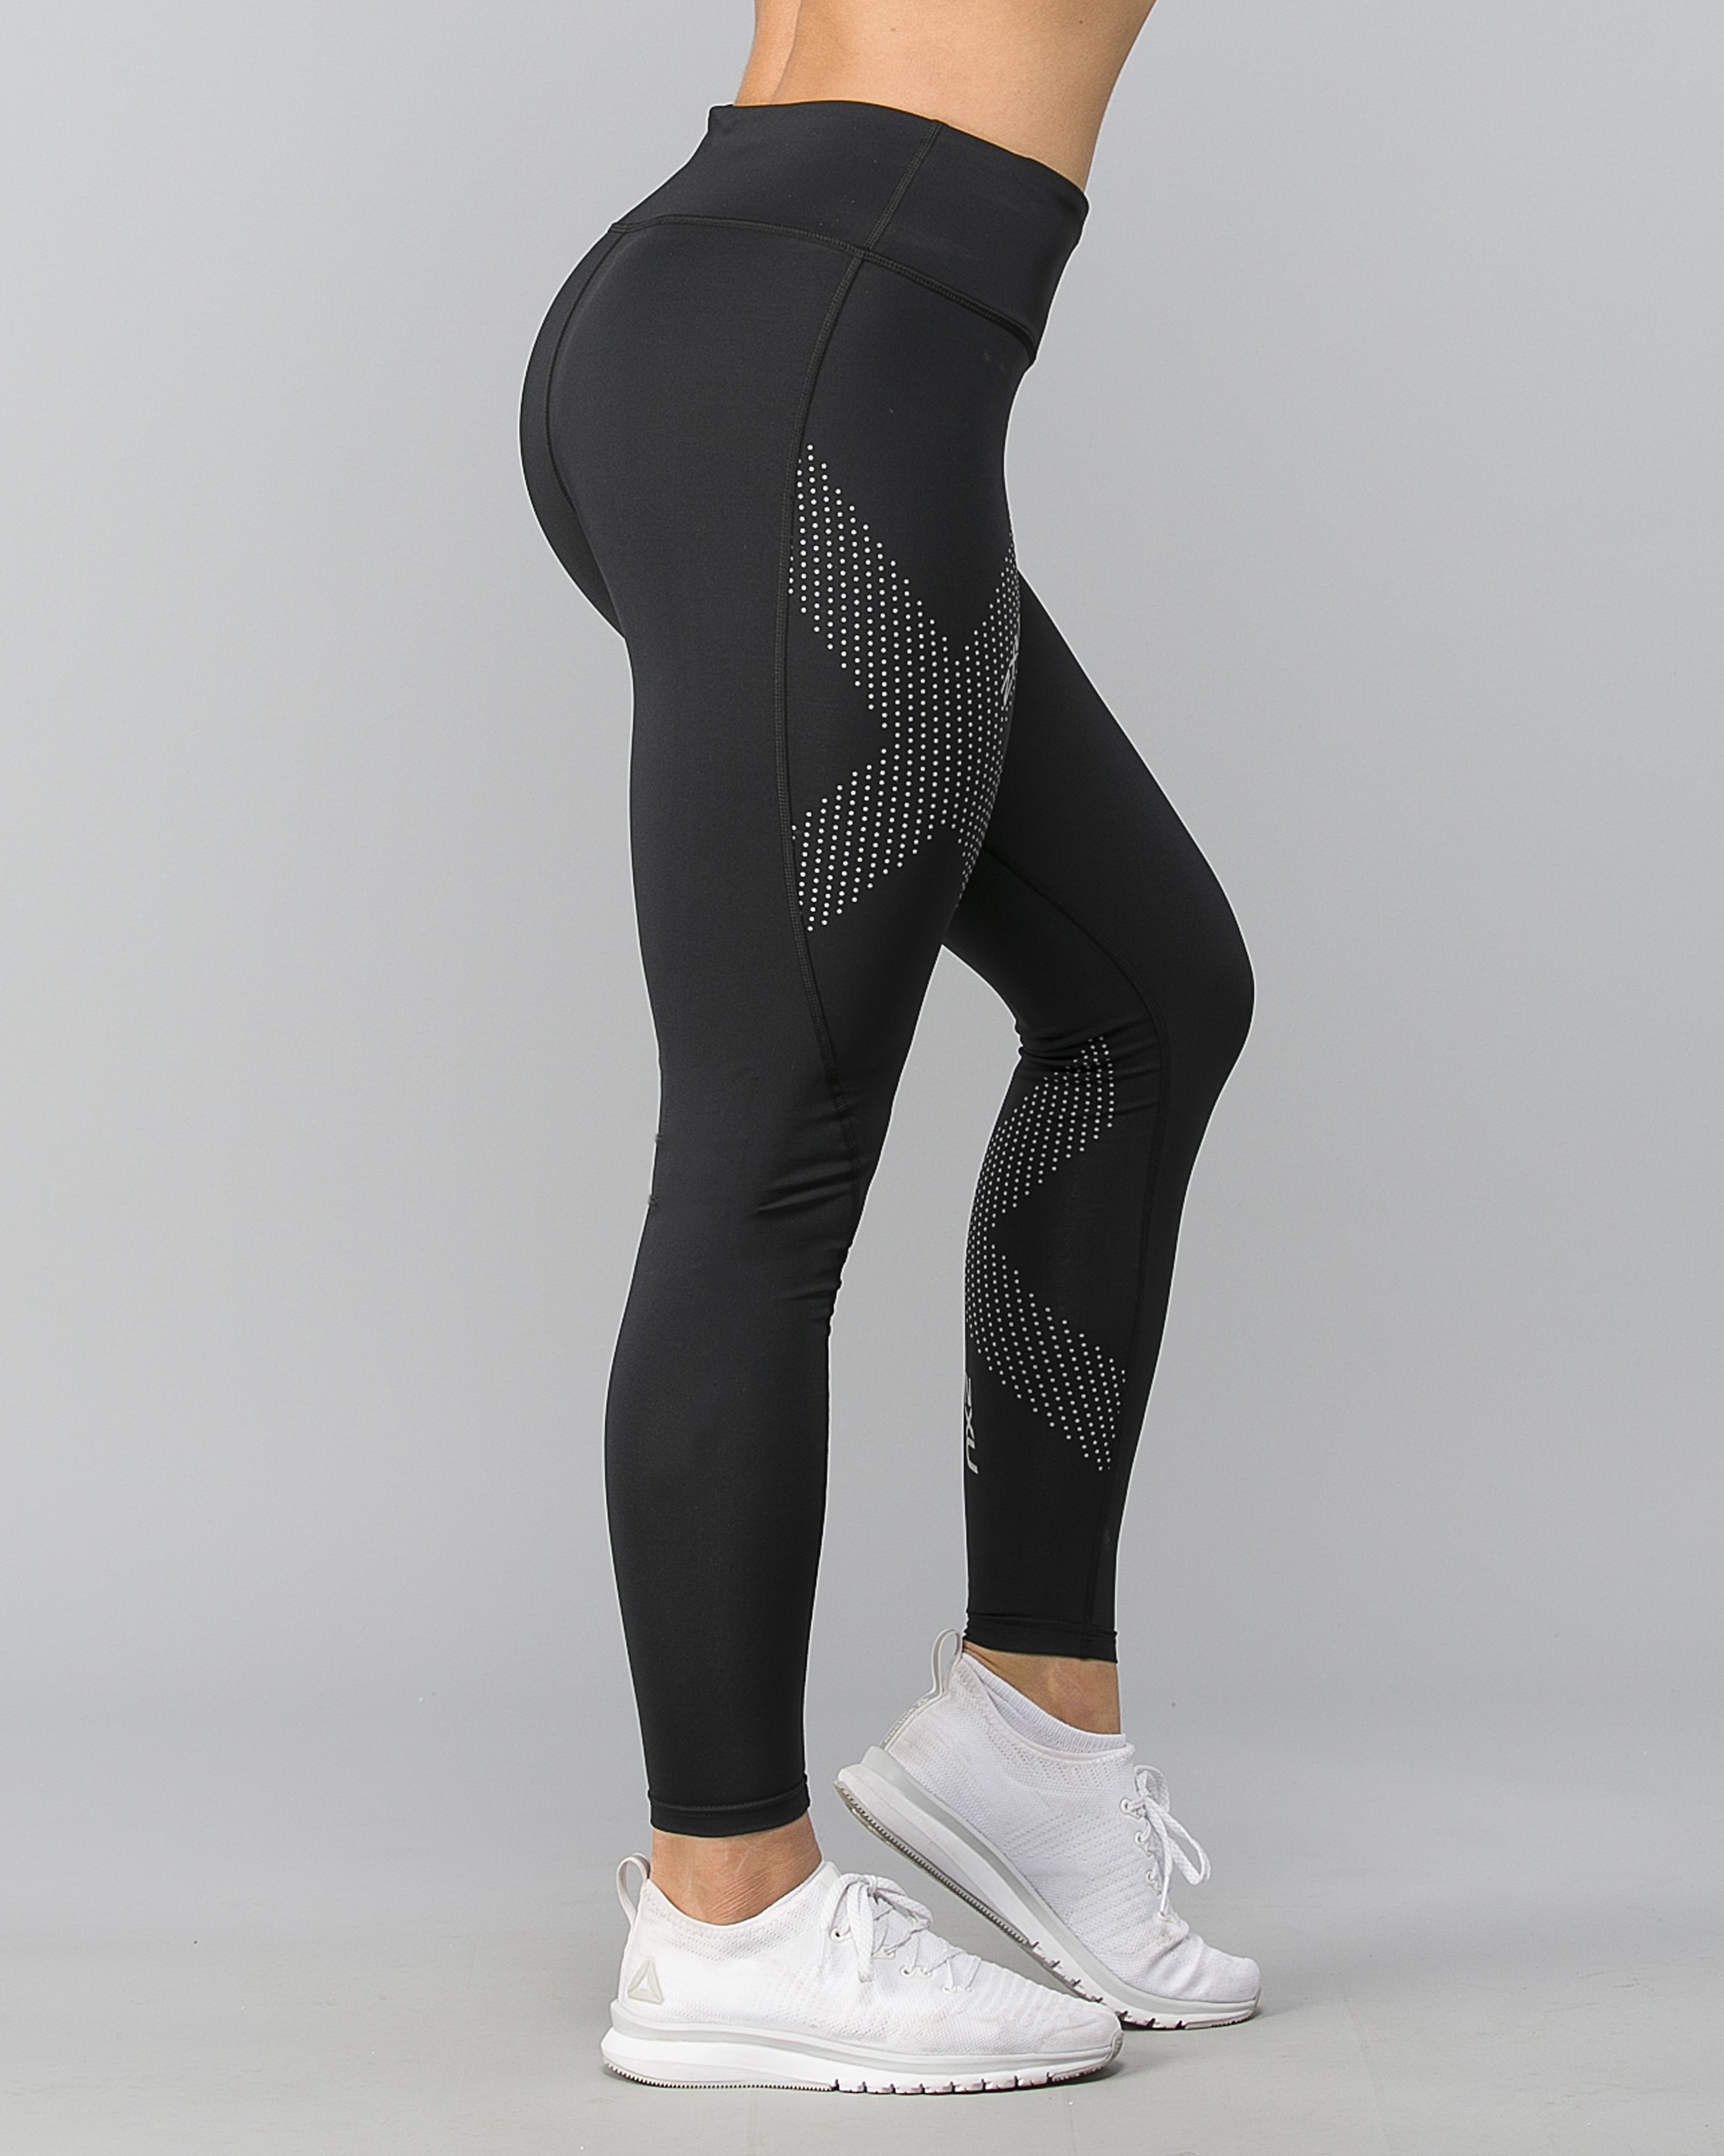 konto Ingeniører mikrocomputer 2XU Mid-Rise Compression Tights - Black/Dotted Reflective - Tights.no